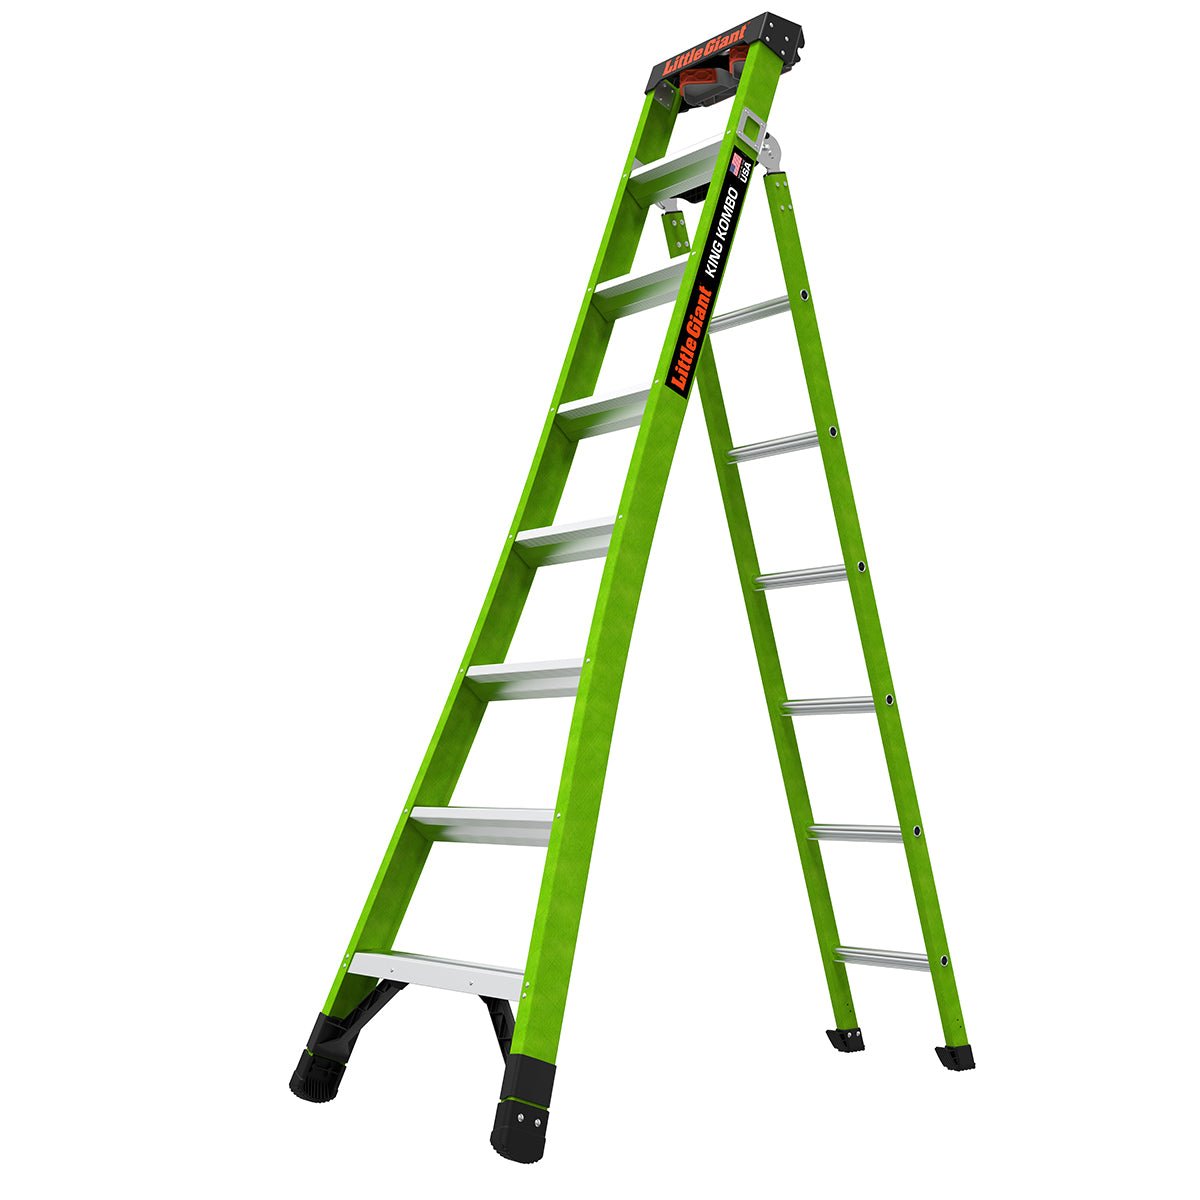 Little Giant 13908-303 - KING KOMBO, Professional, M8, 8’- CSA Grade Type IAA – 375 lb/170 kg Rated, Fiberglass, 3-in-1 Combination Ladder, Rotating Wall Pad, GRIP-N-GO Single-Hand Release Hinge